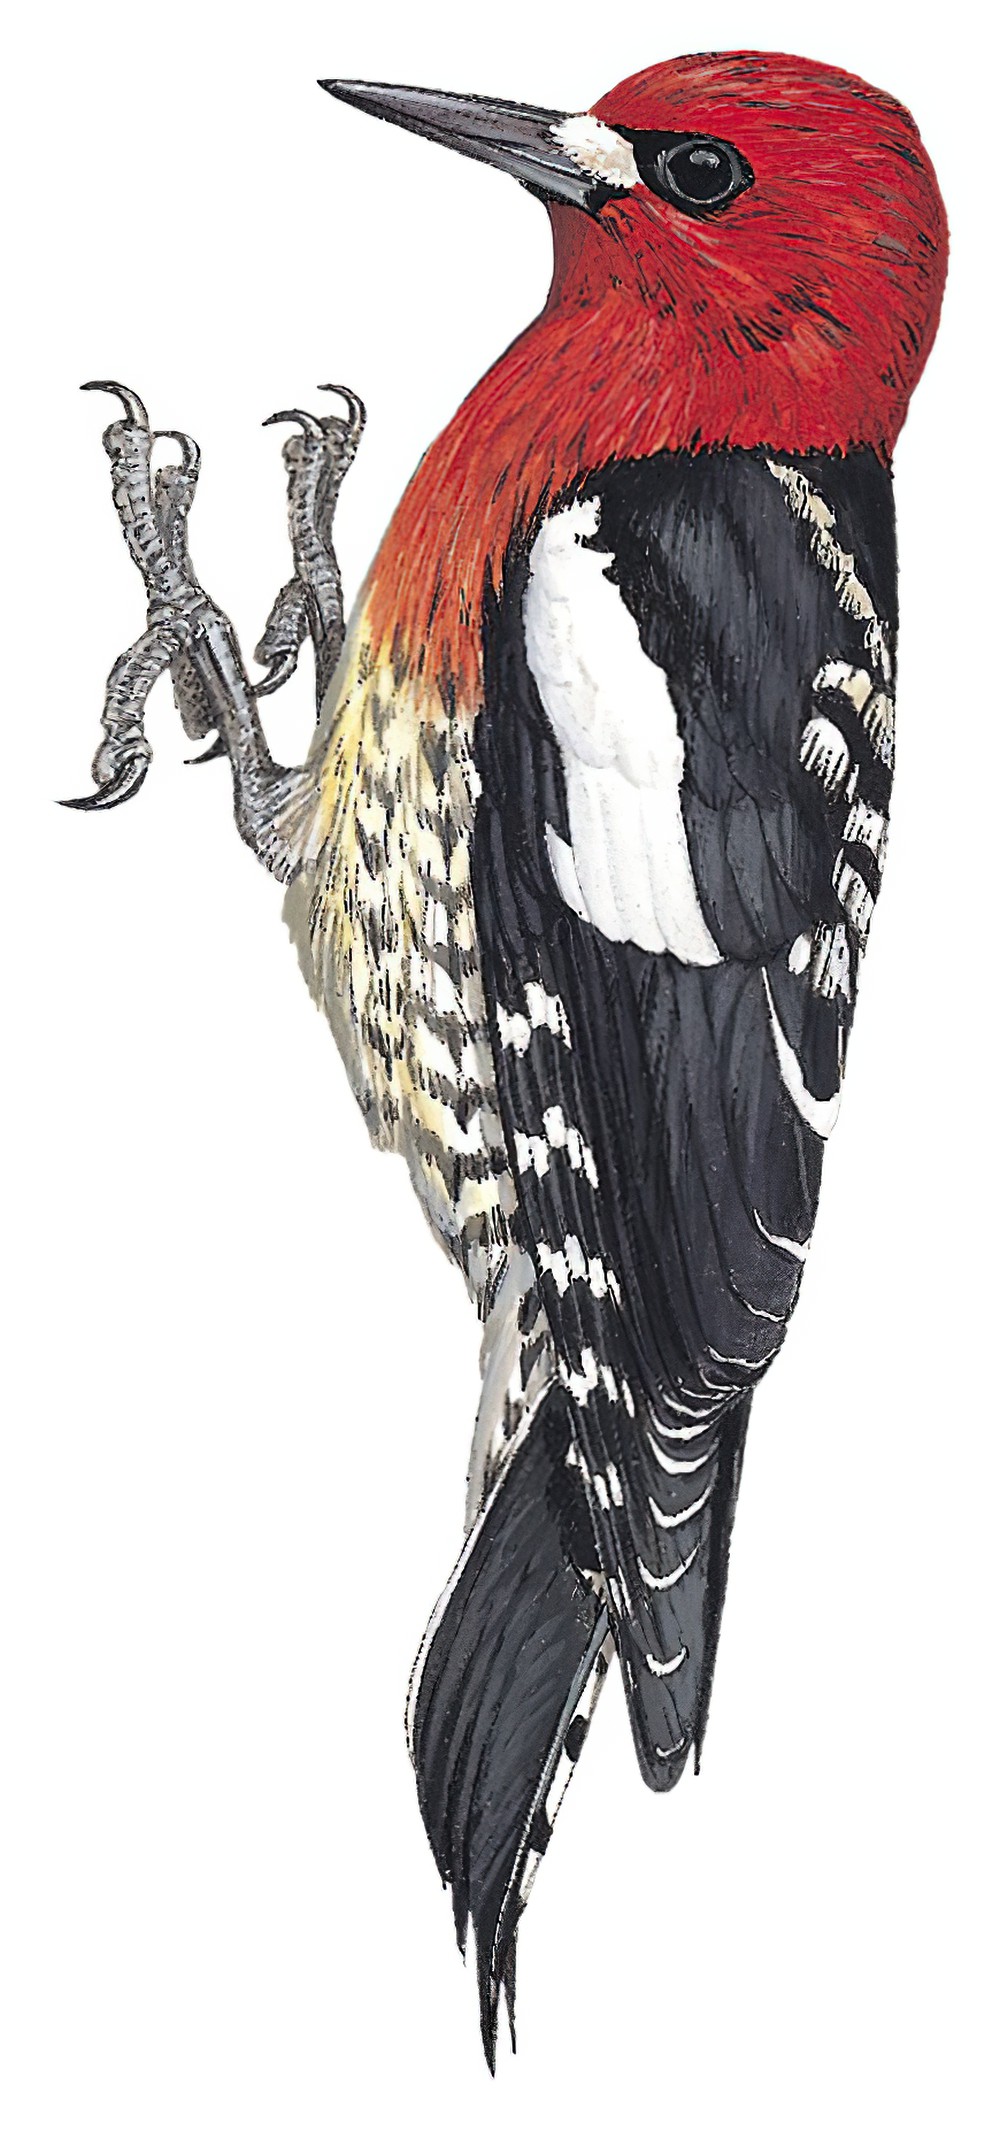 Red-breasted Sapsucker / Sphyrapicus ruber